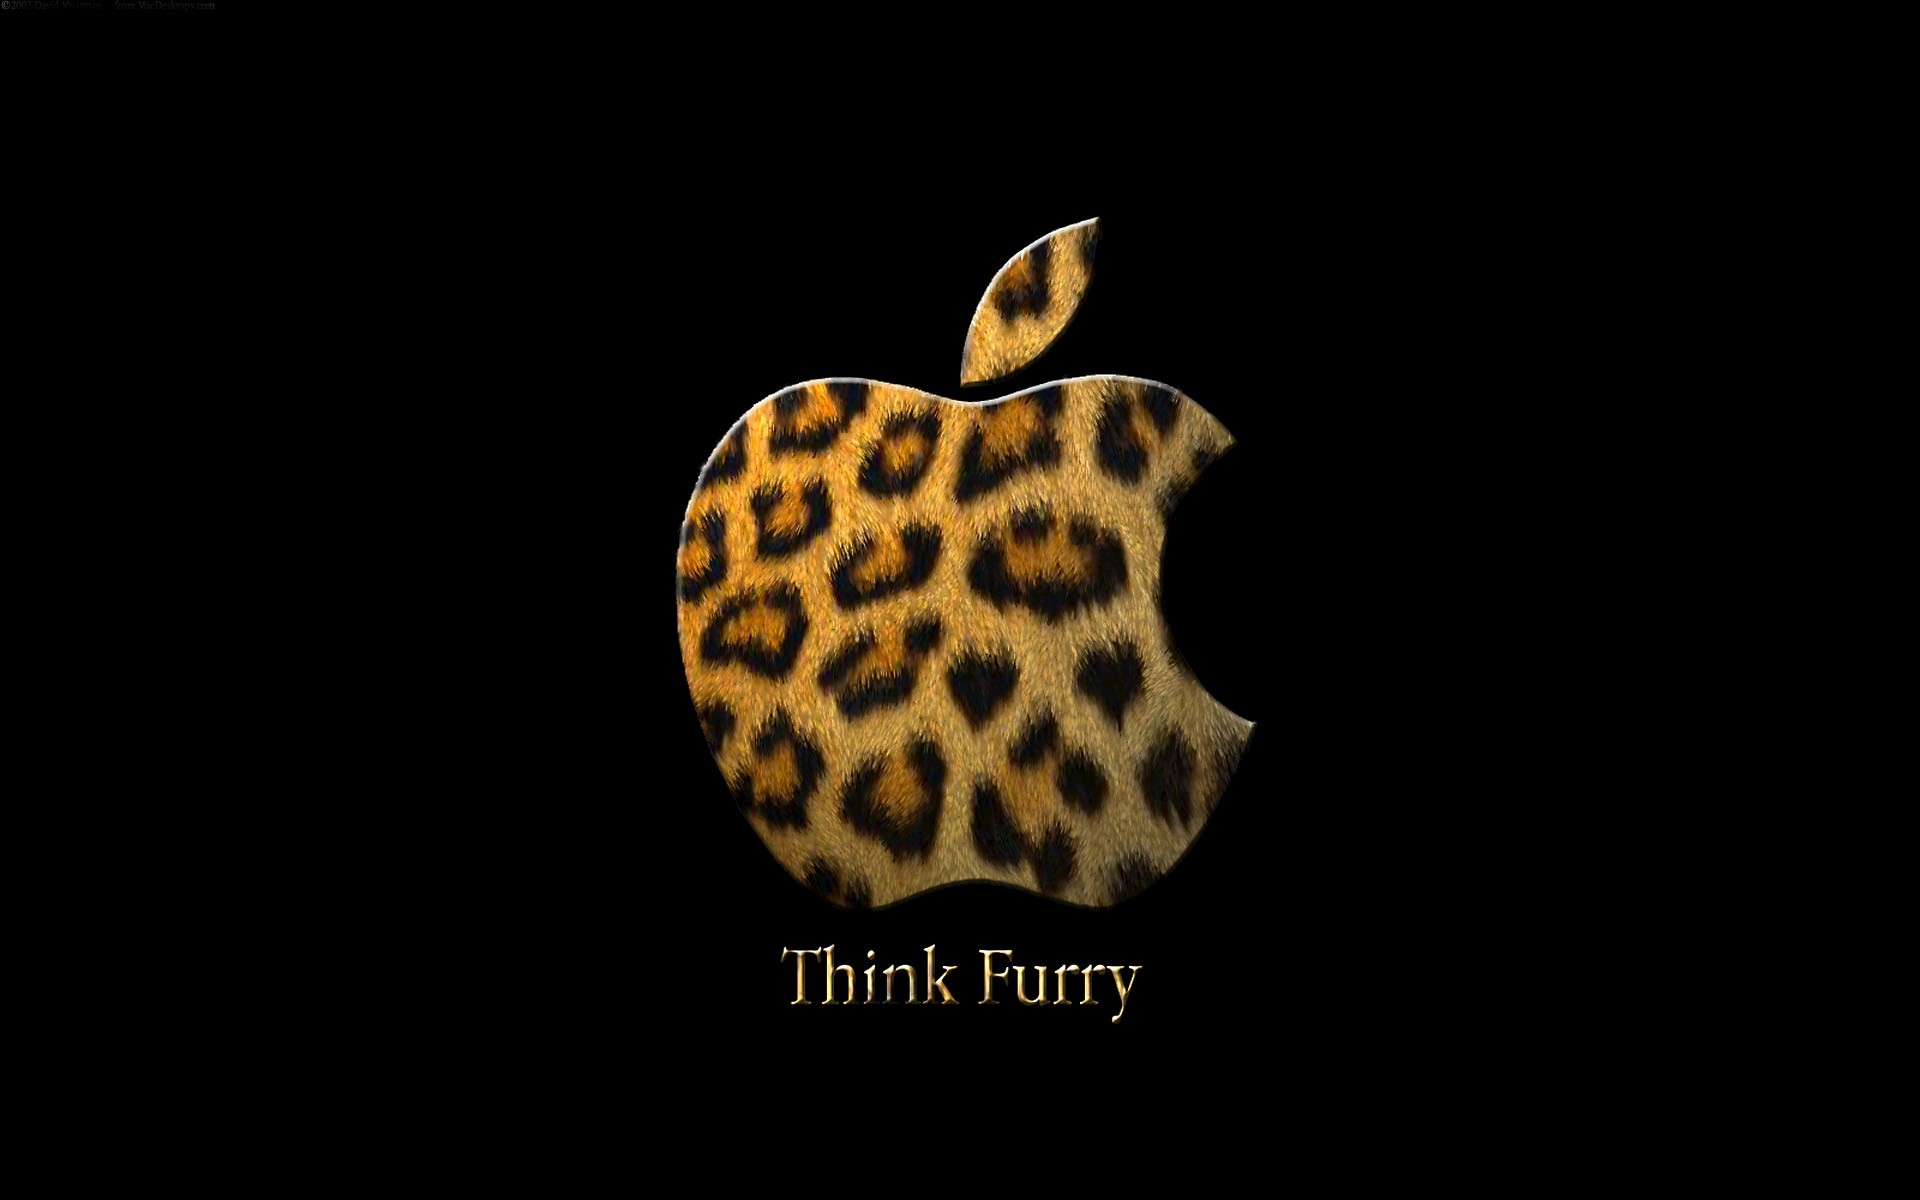 1920x1200 the Think Furry Wallpaper, Think Furry iPhone Wallpaper, Think Furry .